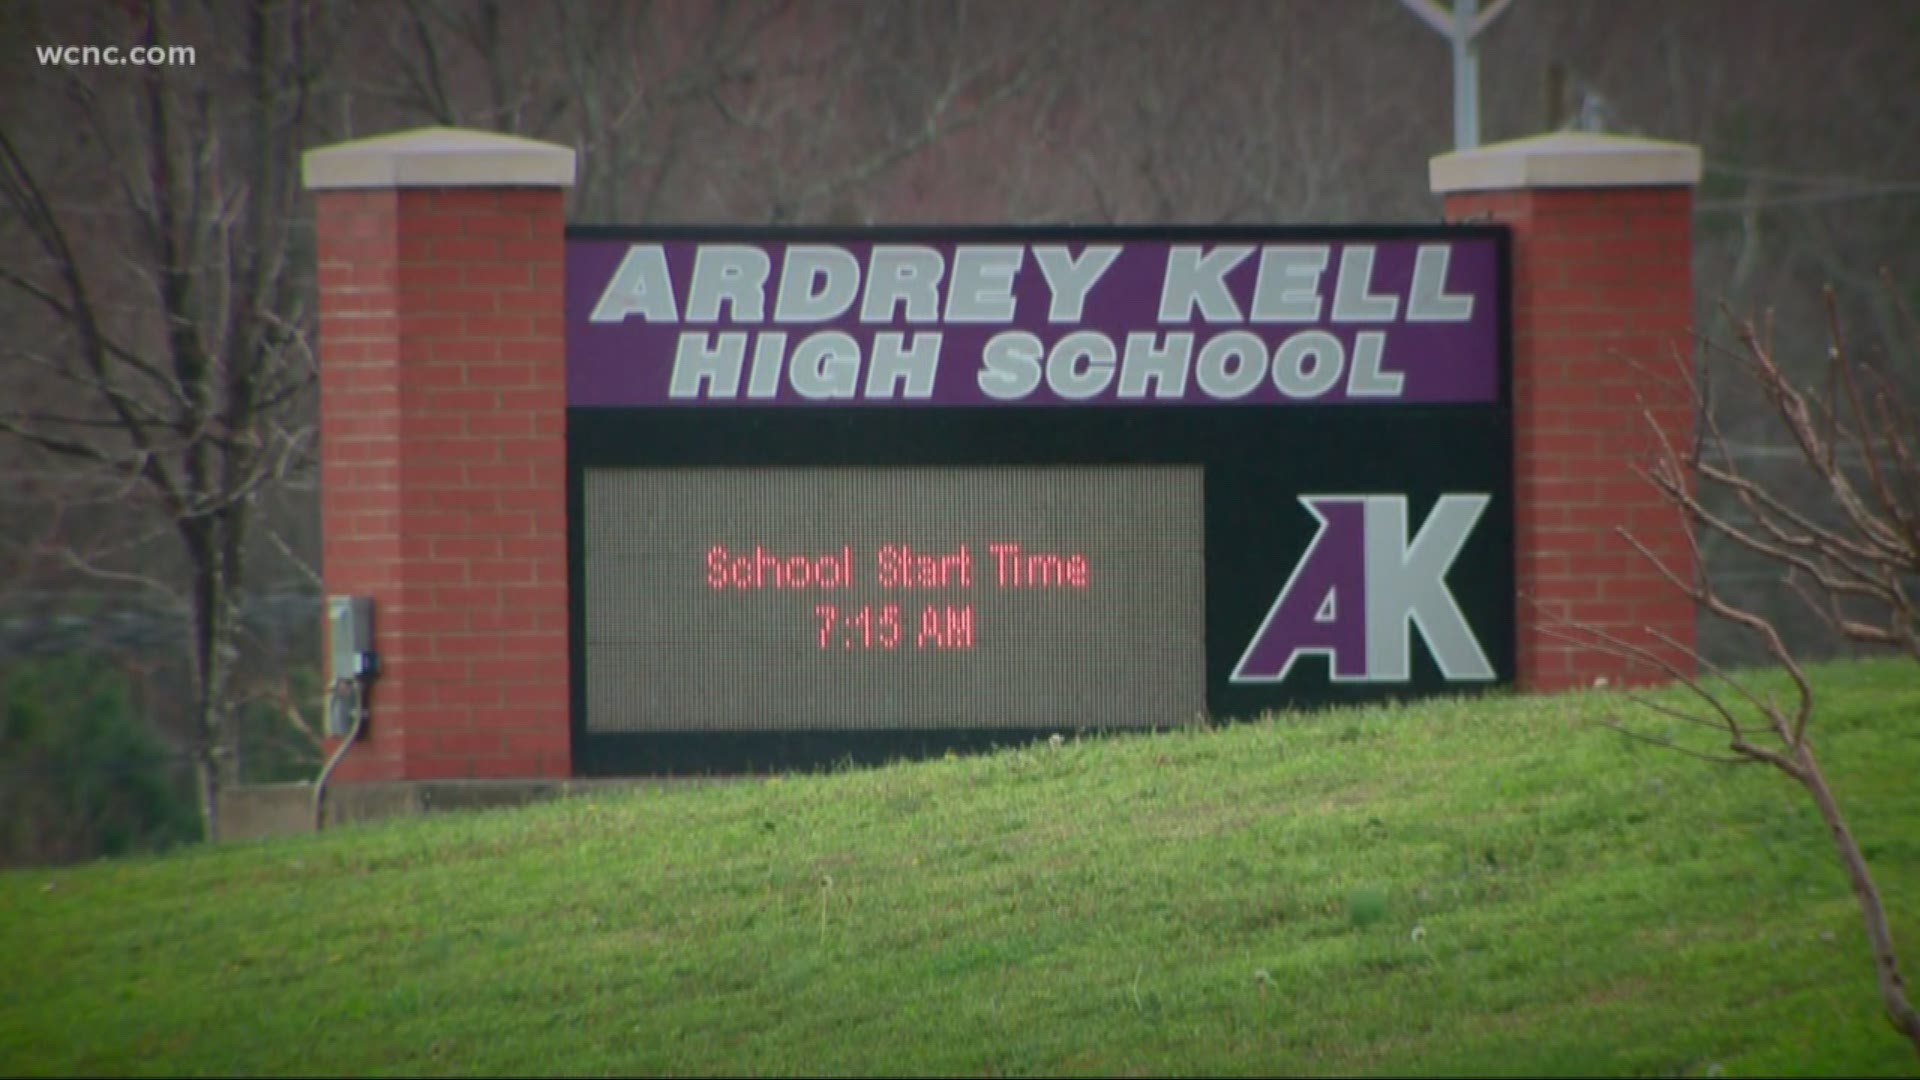 Ardrey Kell is one of the most overcrowded schools in CMS and one of the largest schools in the Carolinas.